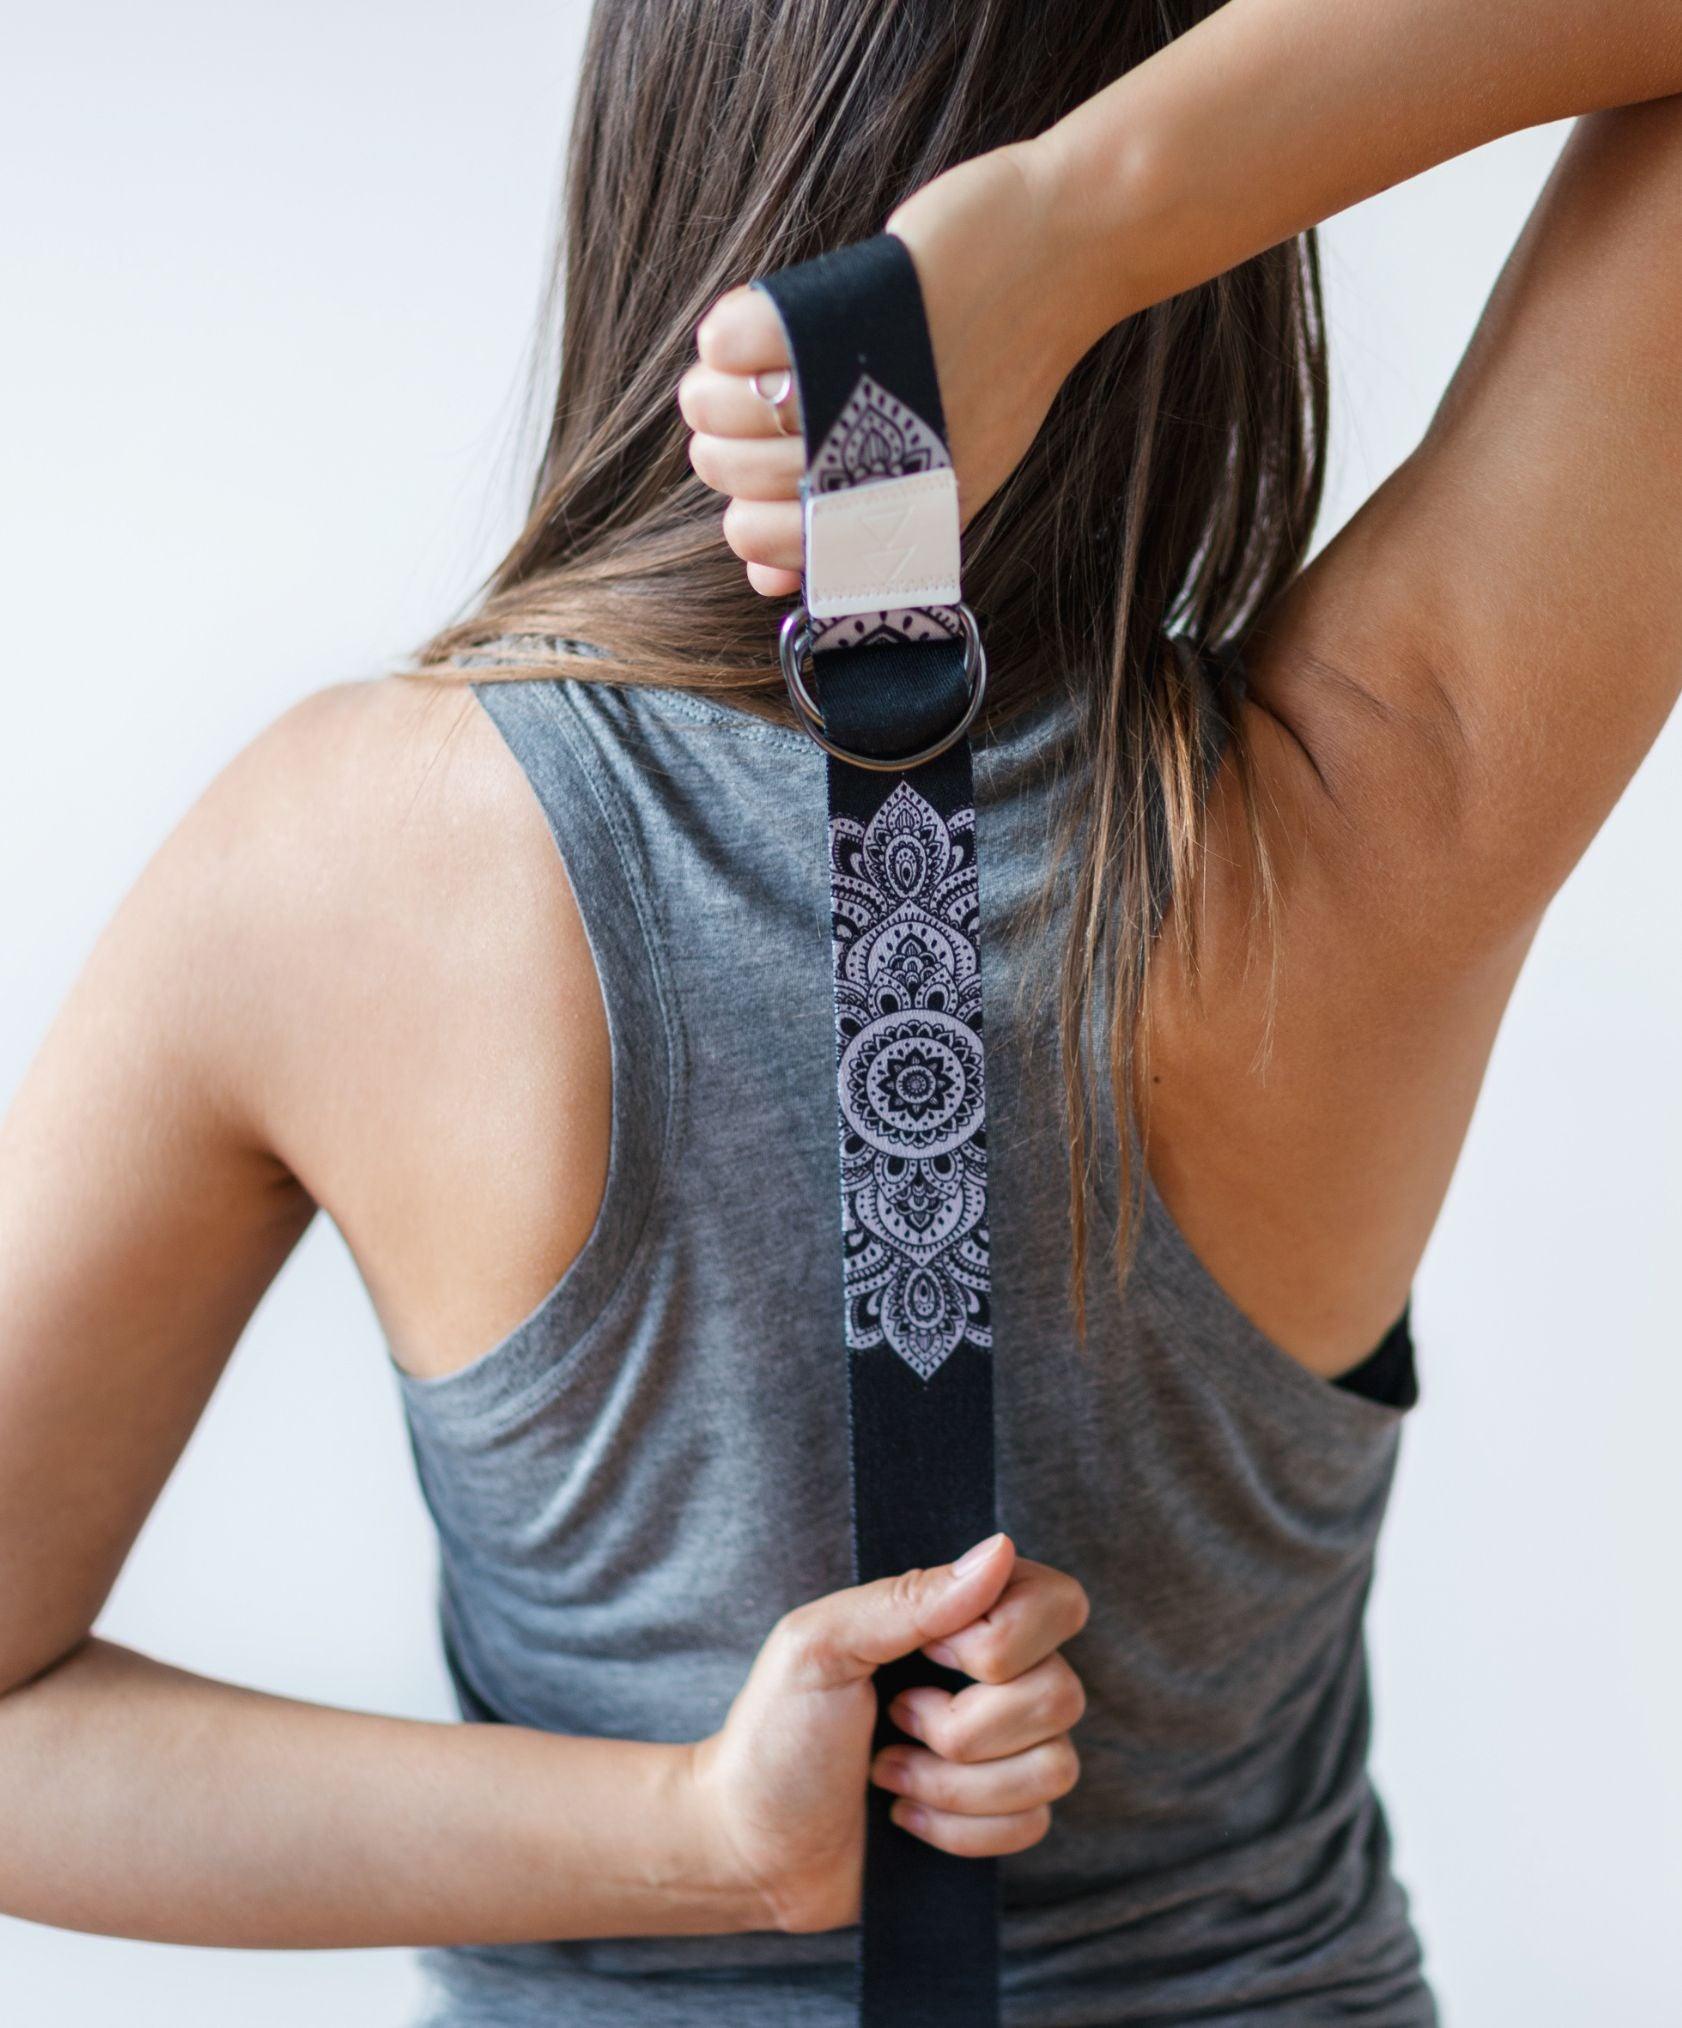 YDL Yoga Strap - Best For Stretching, Pilates, Physical Therapy - Yoga Design Lab 